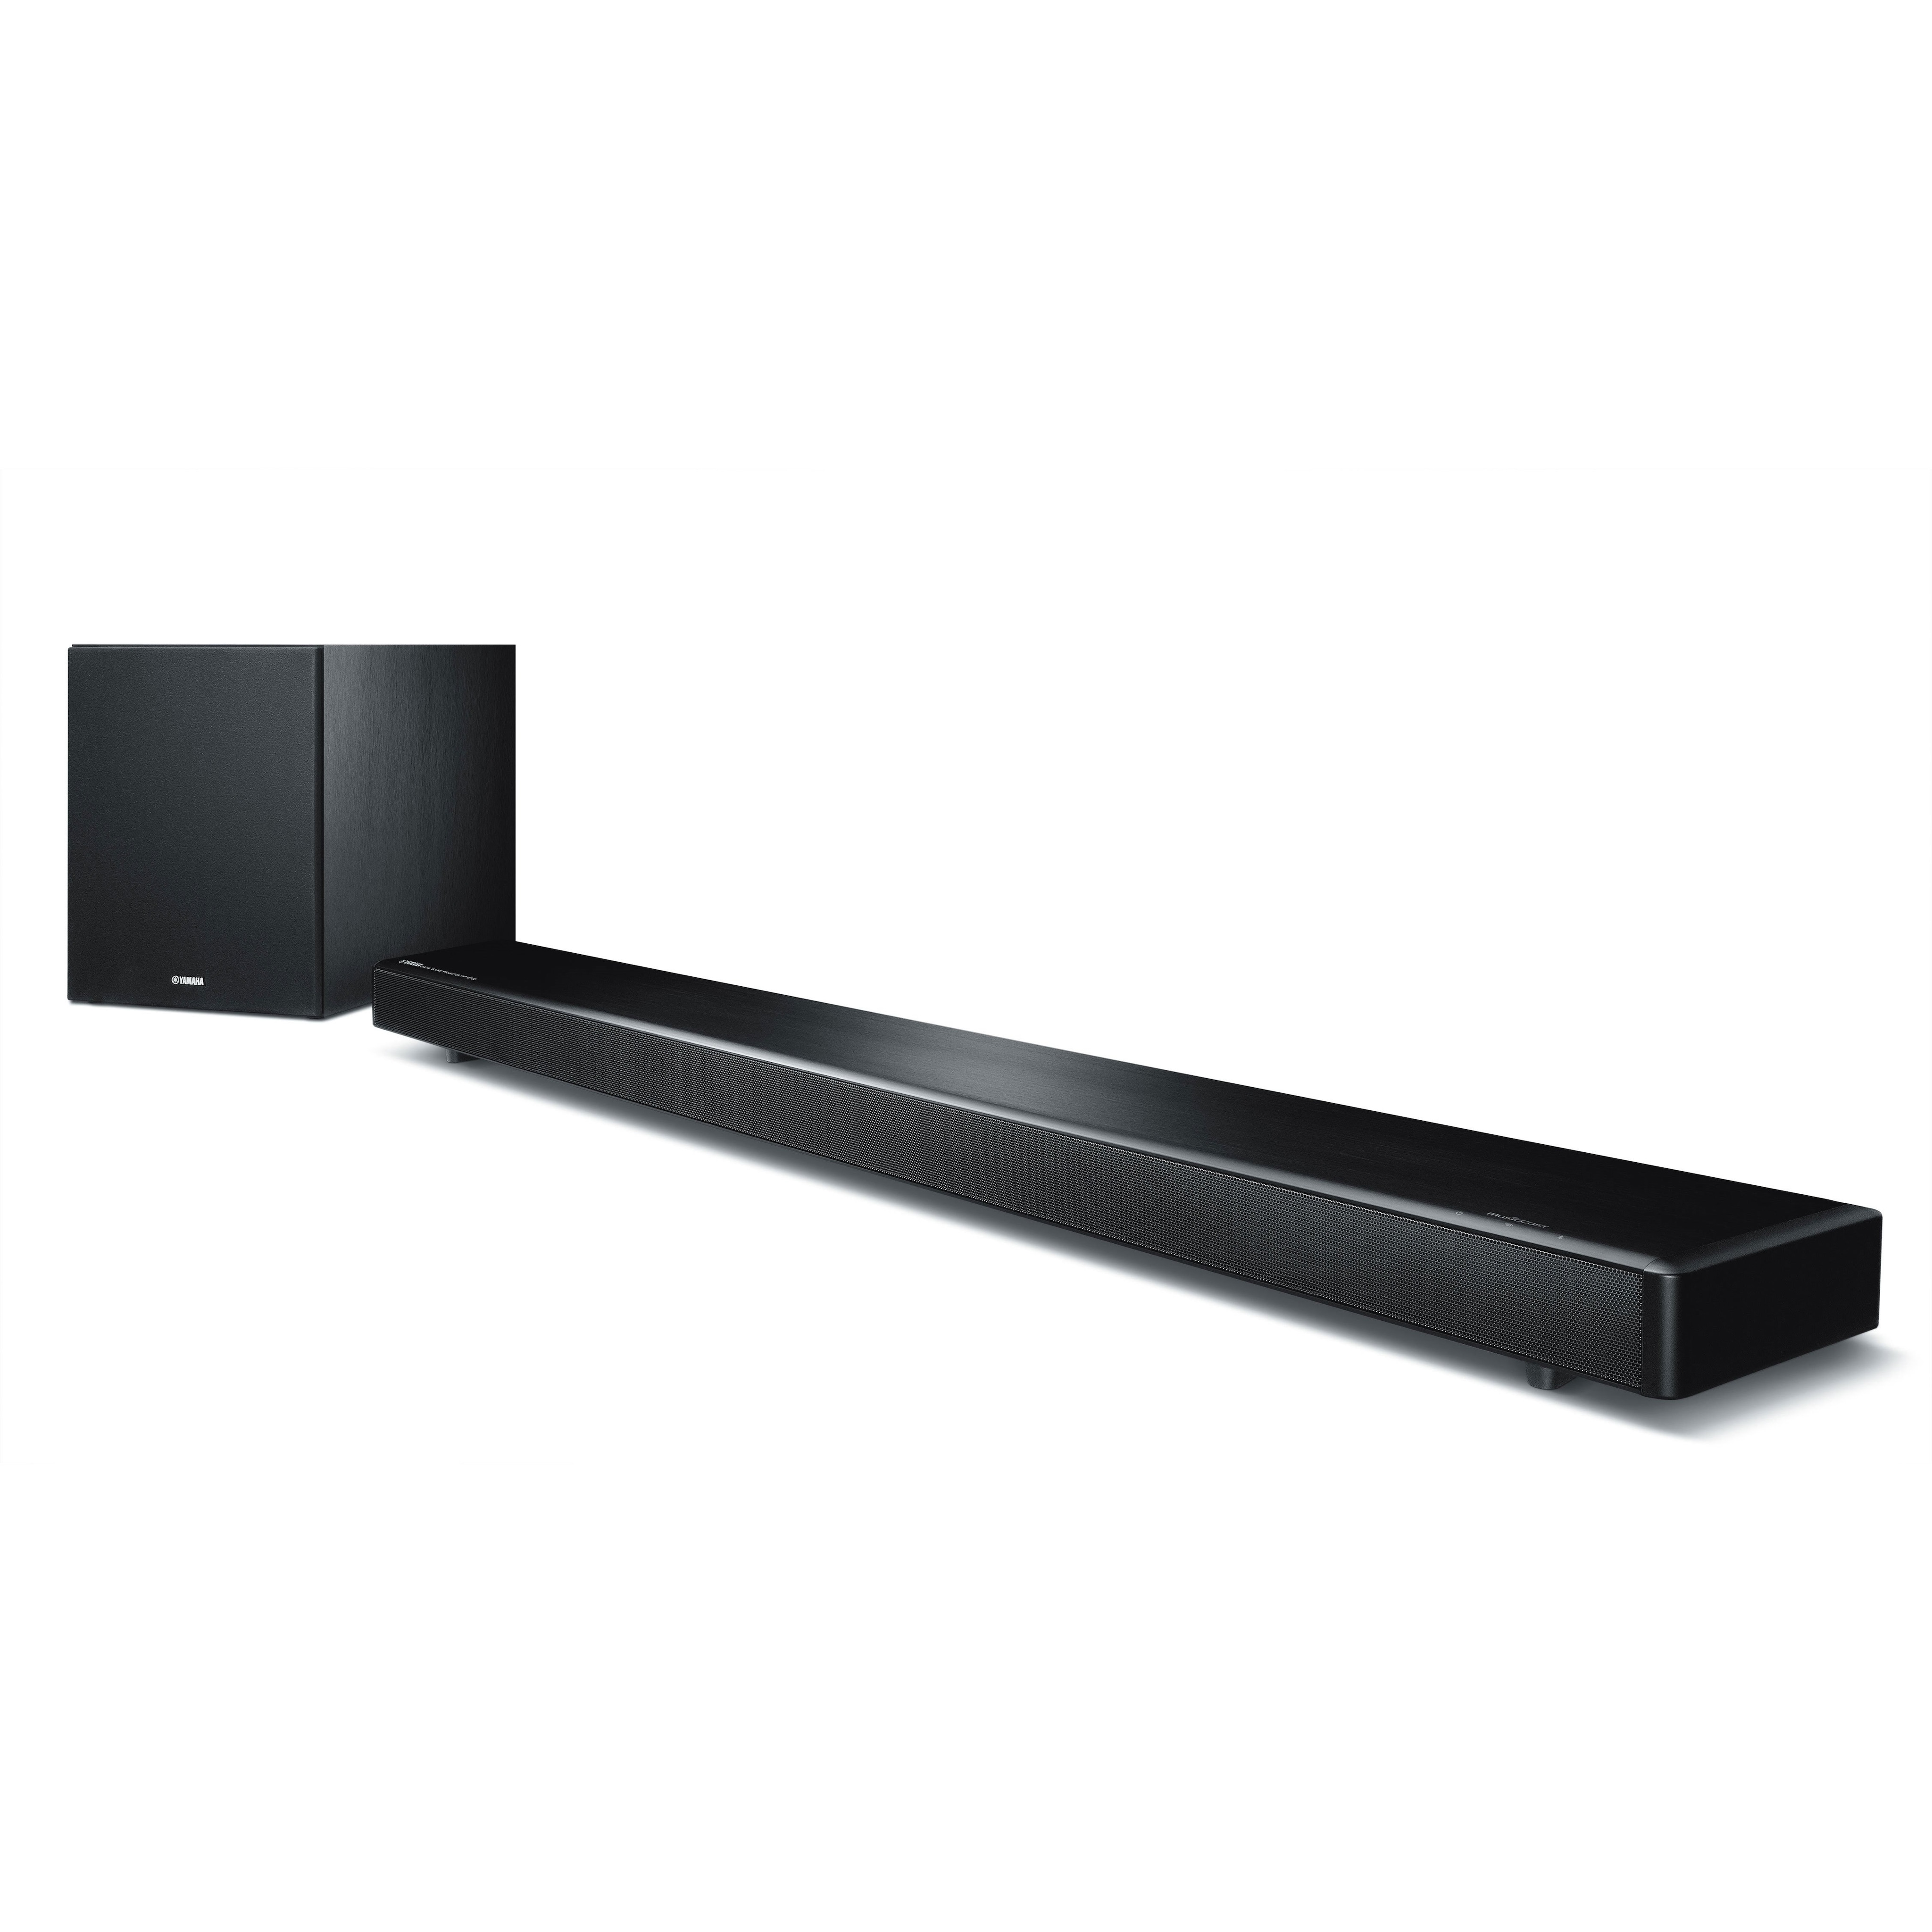 YSP-2700 - Overview Sound Bar - Audio & Visual Products - Yamaha - Other European Countries